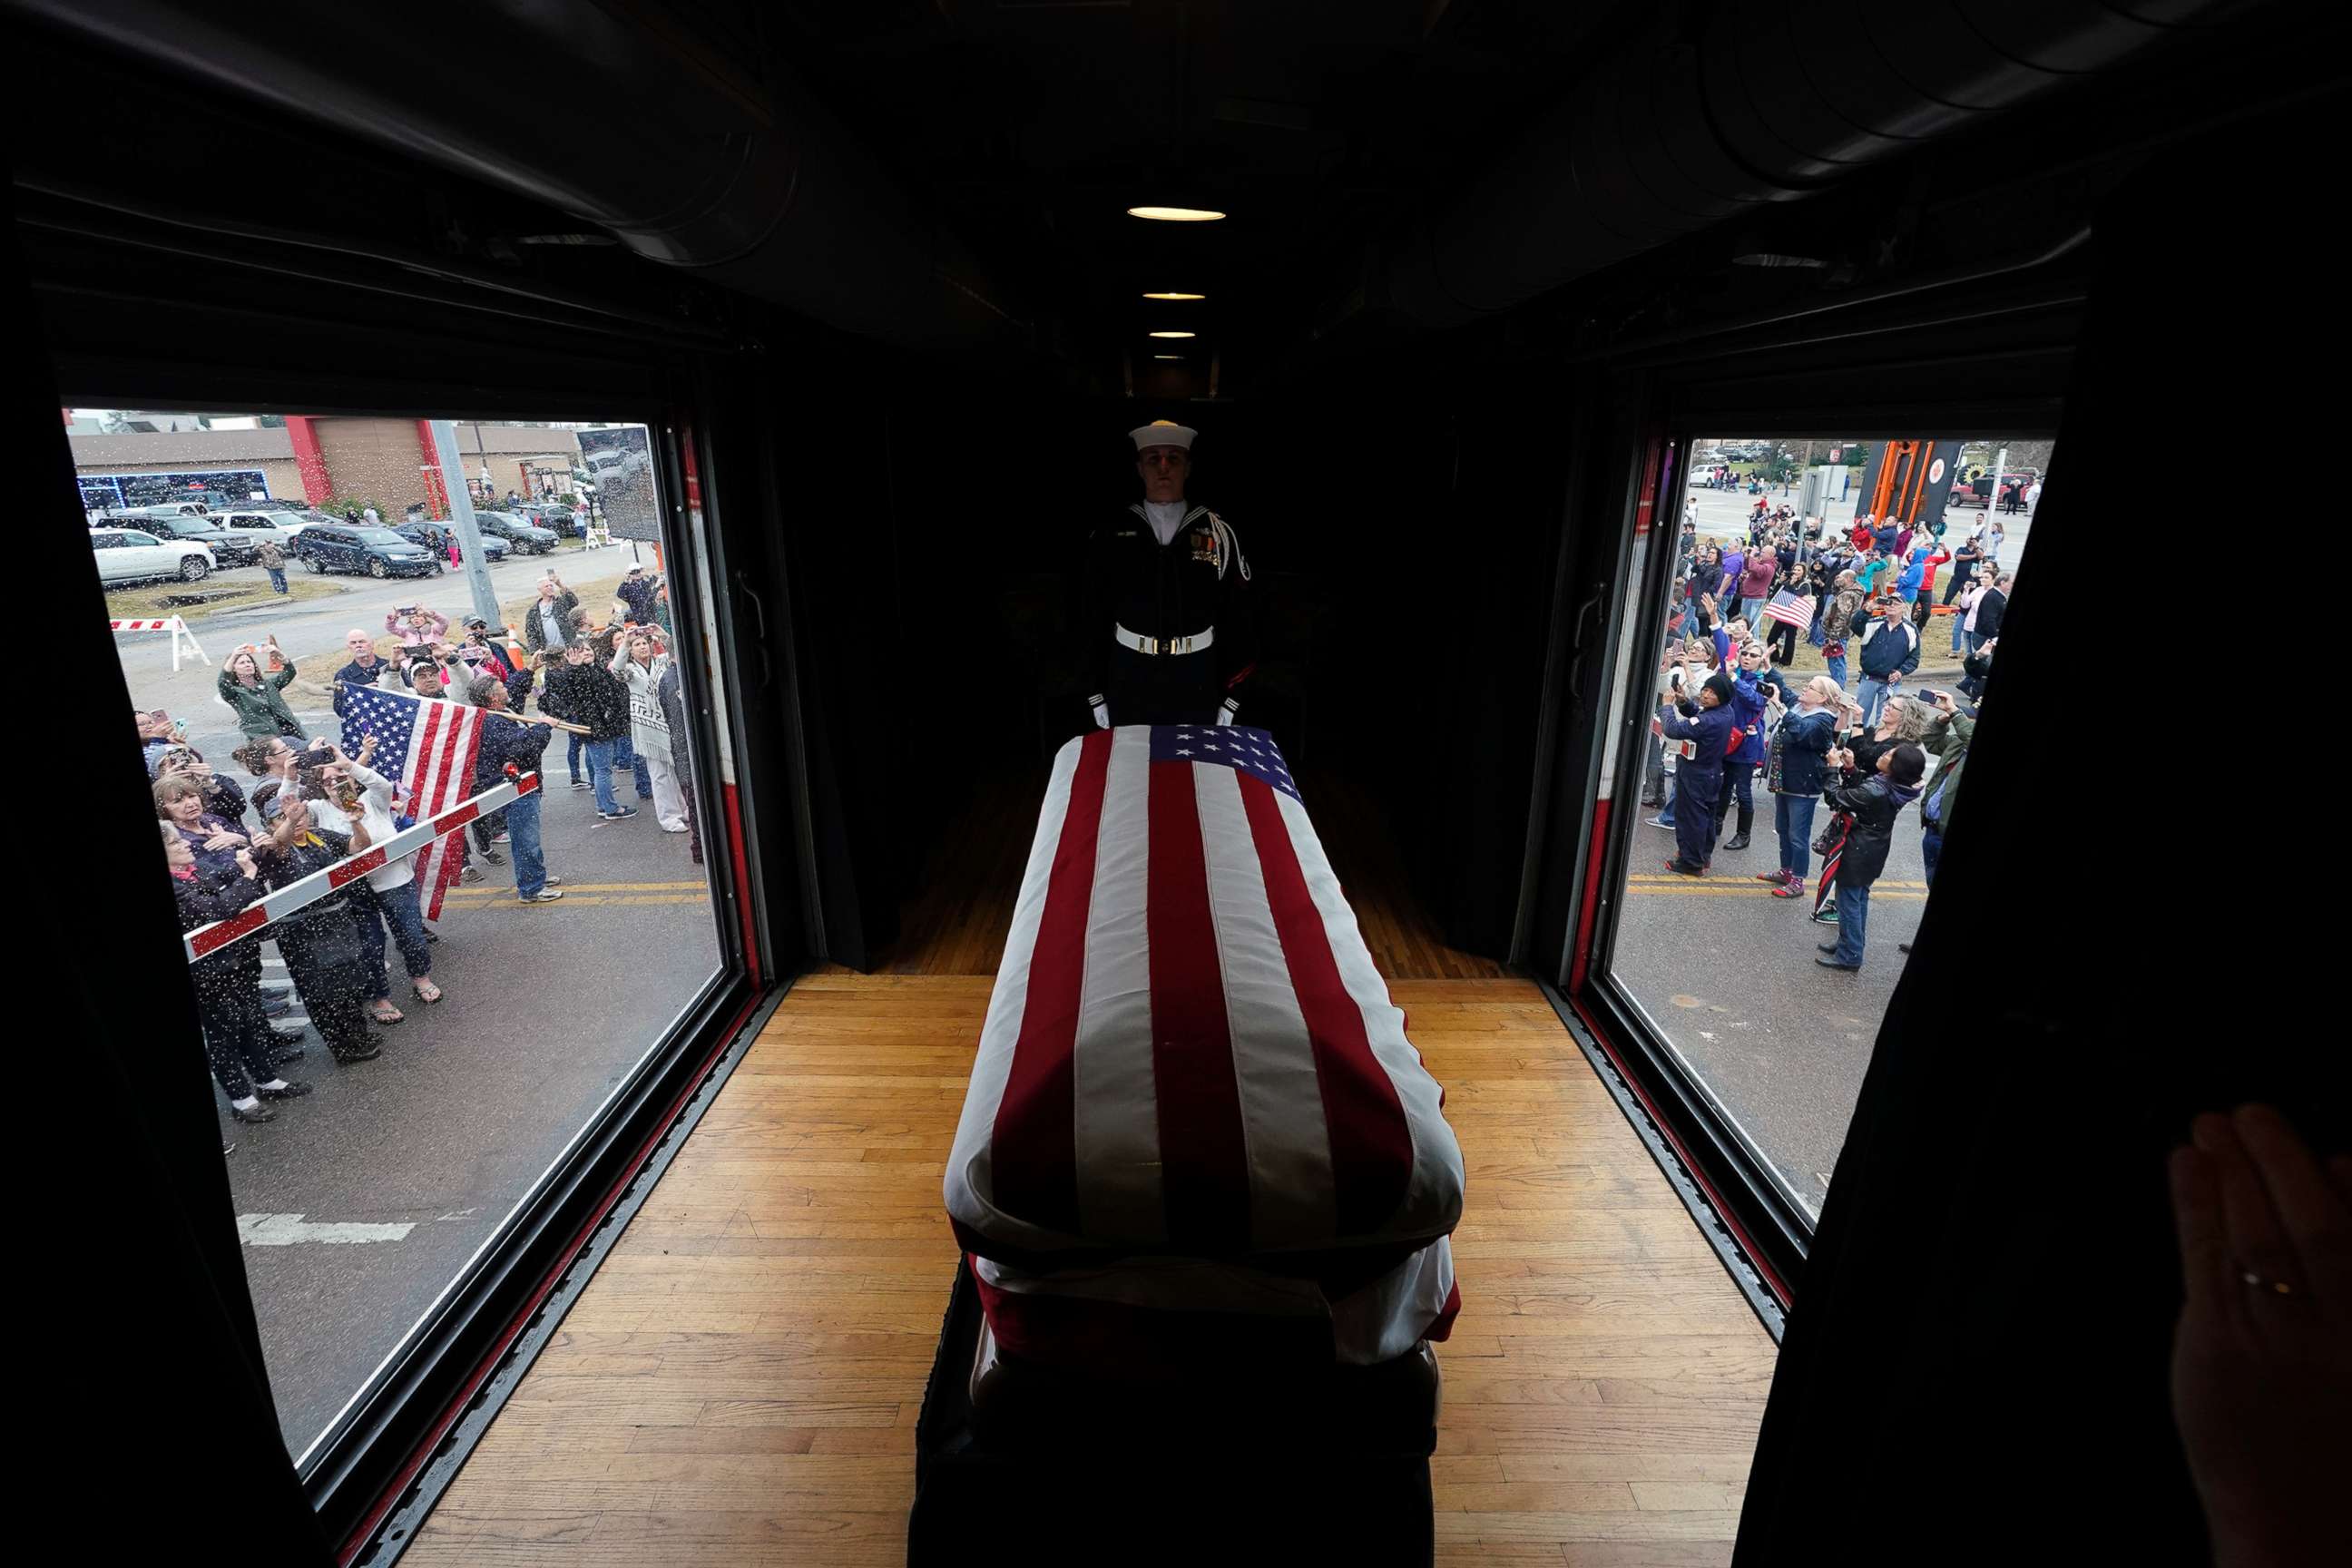 PHOTO: The flag-draped casket of former President George H.W. Bush passes through Magnolia, Texas, Dec. 6, 2018, along the train route from Spring to College Station, Texas.